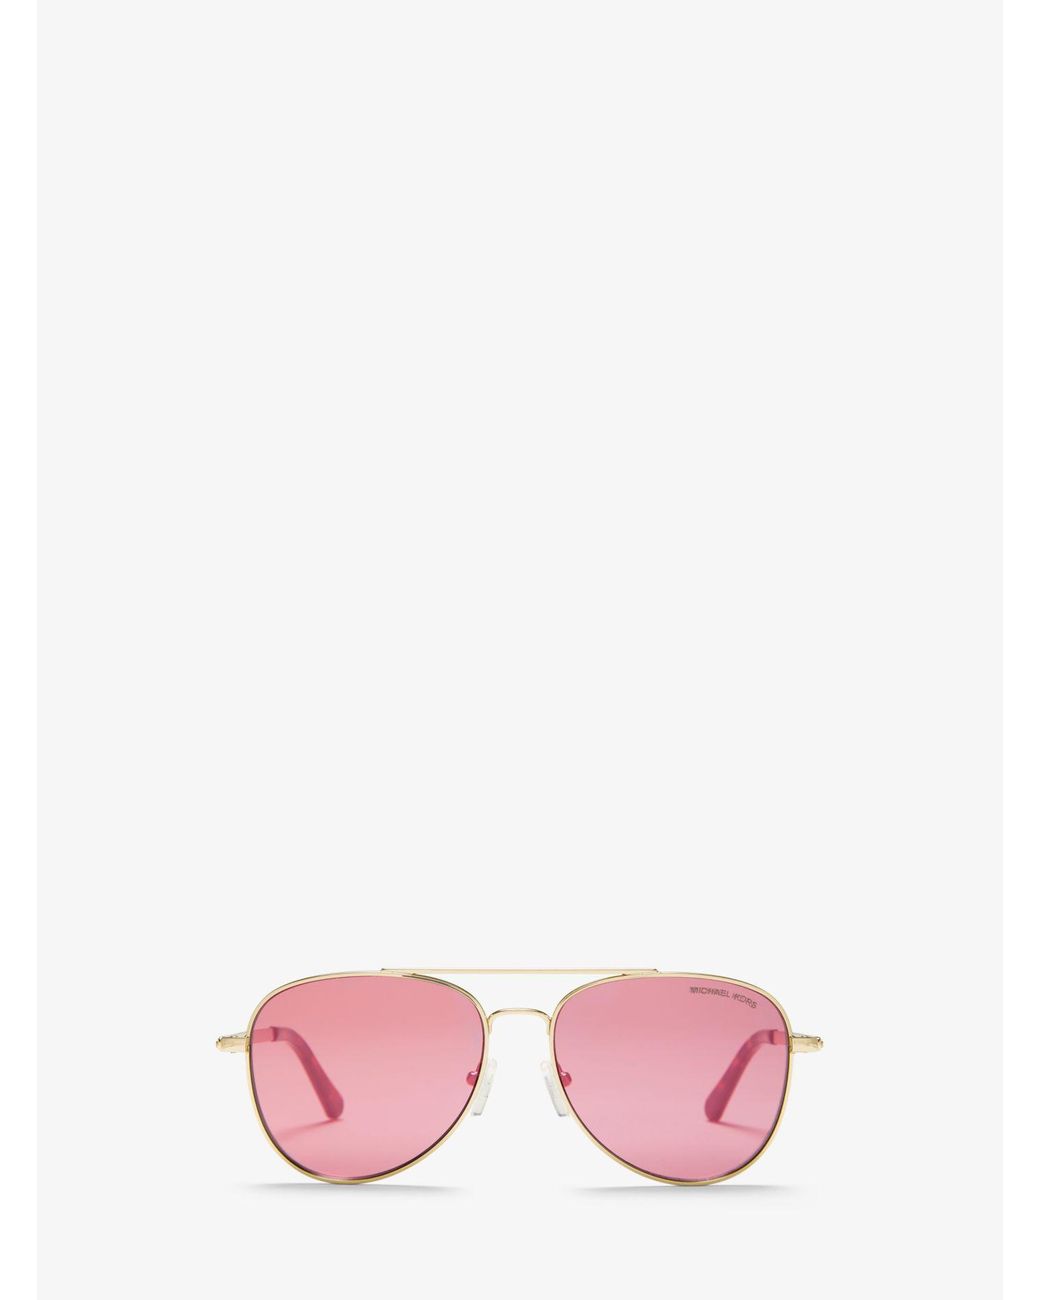 Michael Kors Mk1045 San Diego 11089l Sunglasses Gold in Rose Gold (Pink) -  Save 66% - Lyst